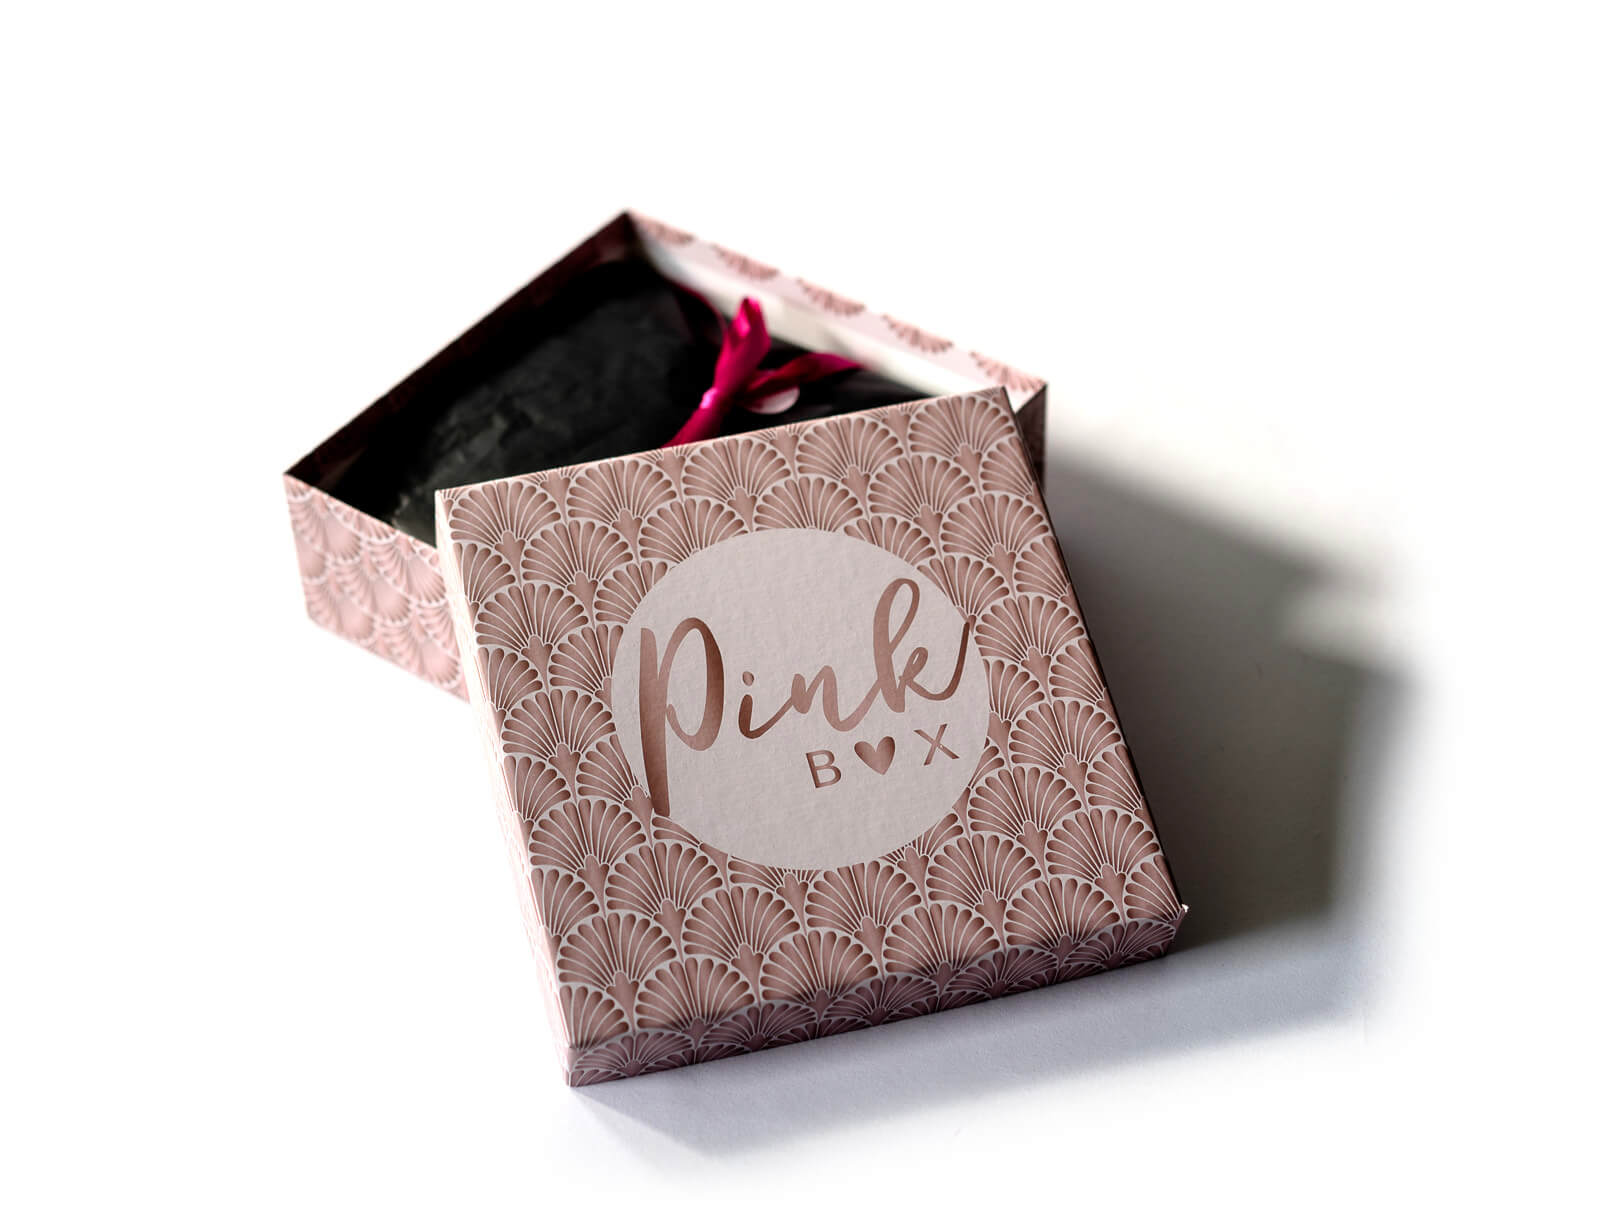 DIE PINK BOX im Dezember 2019 – Pink Box Party, Party, Party 2019